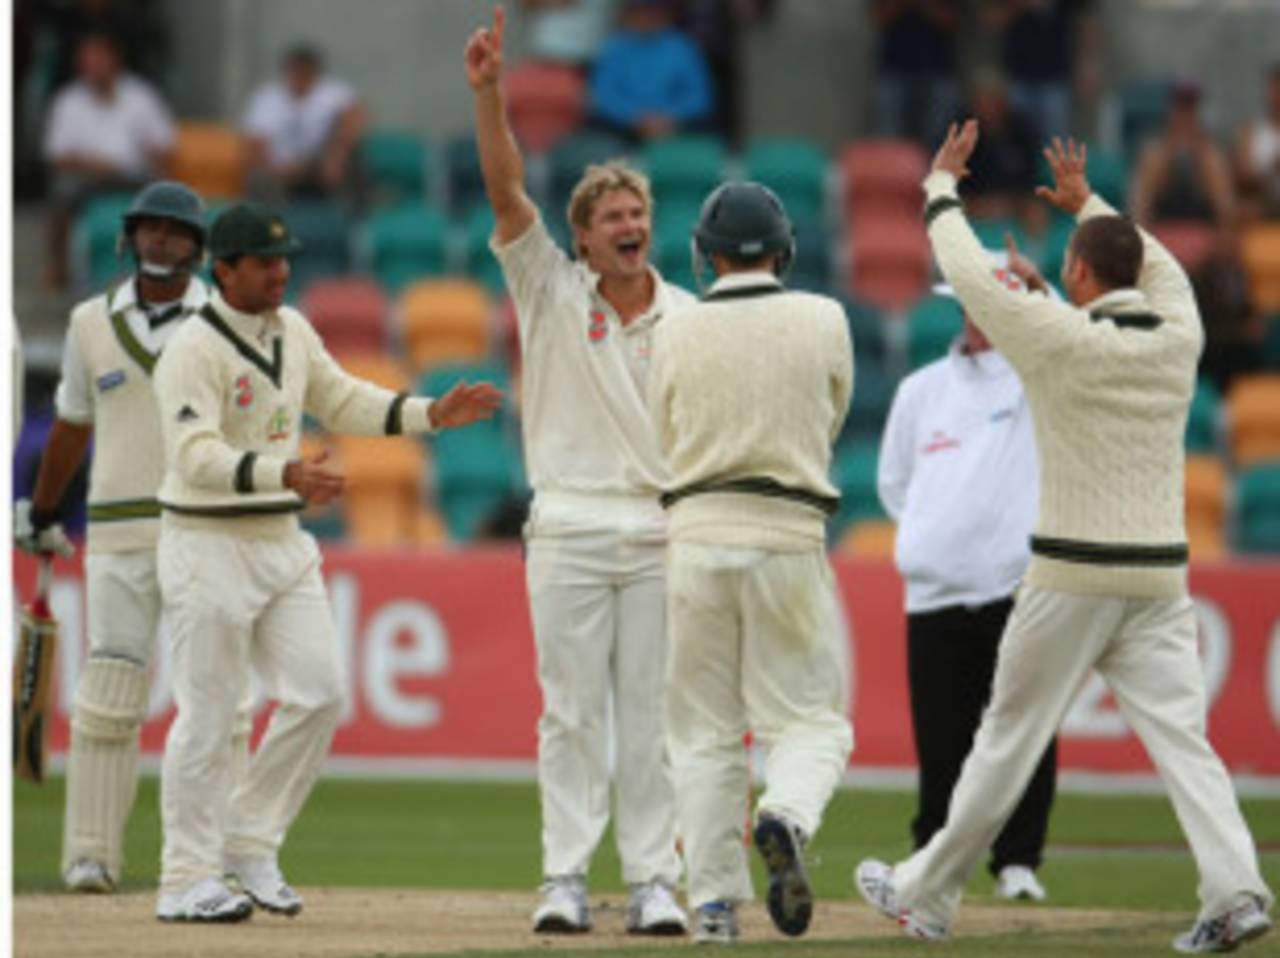 Shane Watson gets his second wicket after trapping Umar Akmal lbw, 3rd Test, Australia v Pakistan, 4th day, Hobart, January 17, 2010